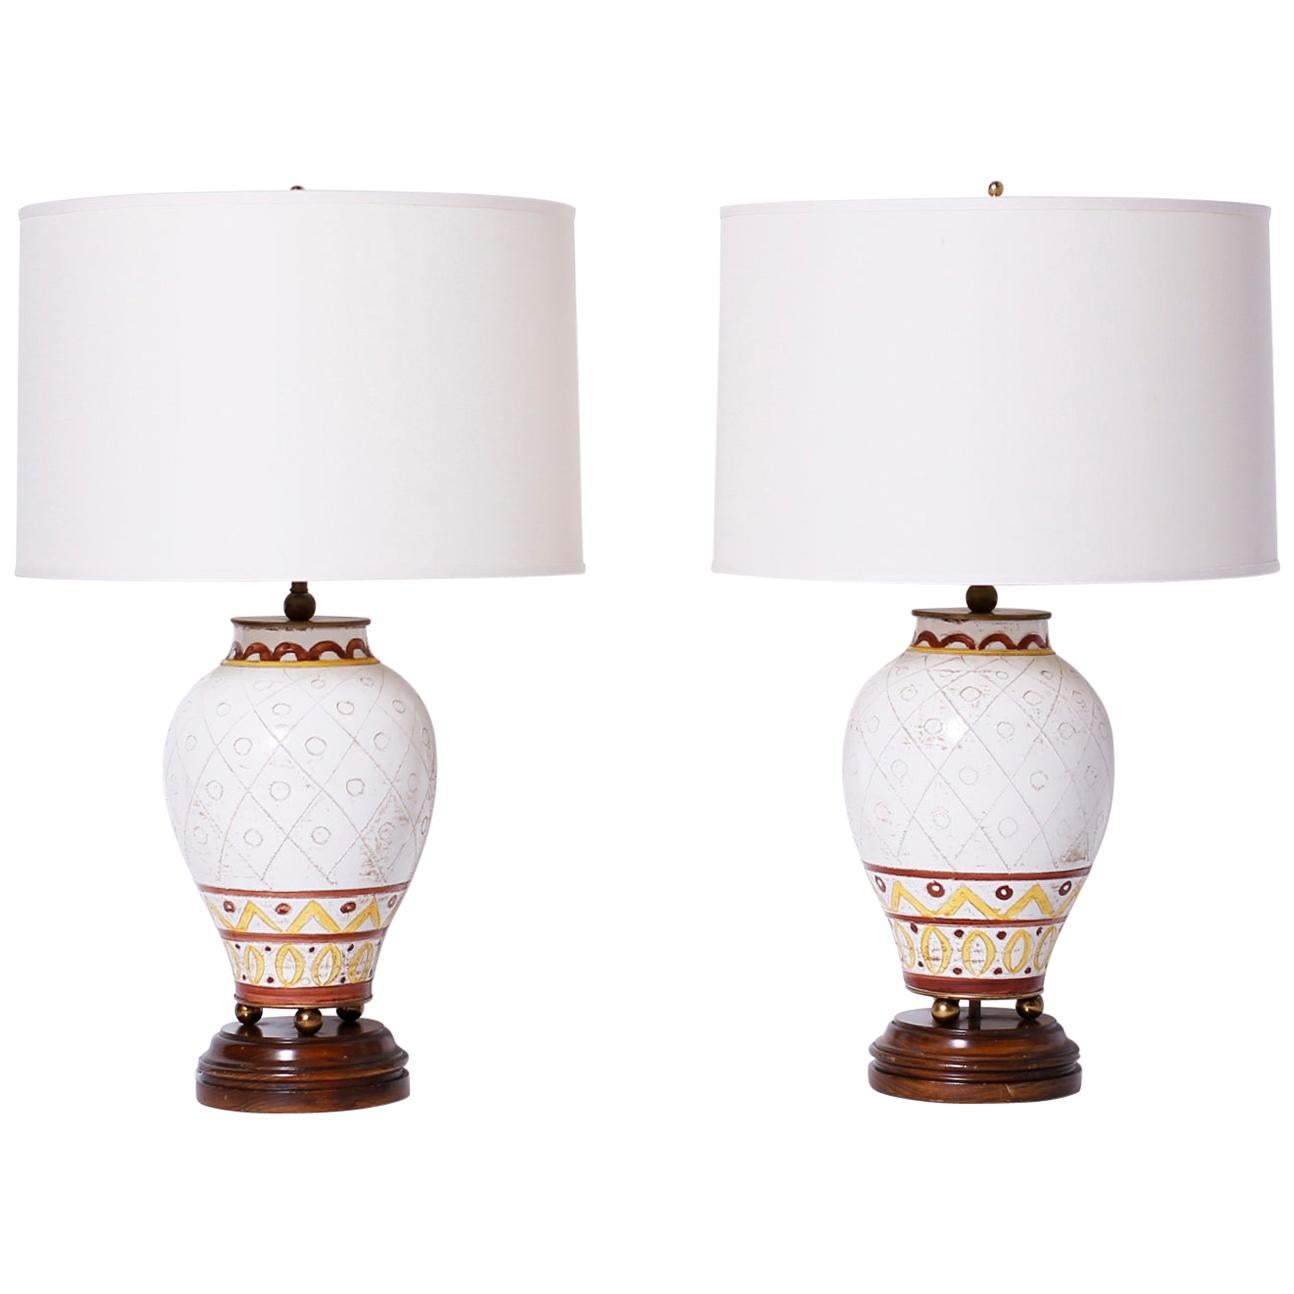 Pair of Midcentury Italian Pottery Table Lamps